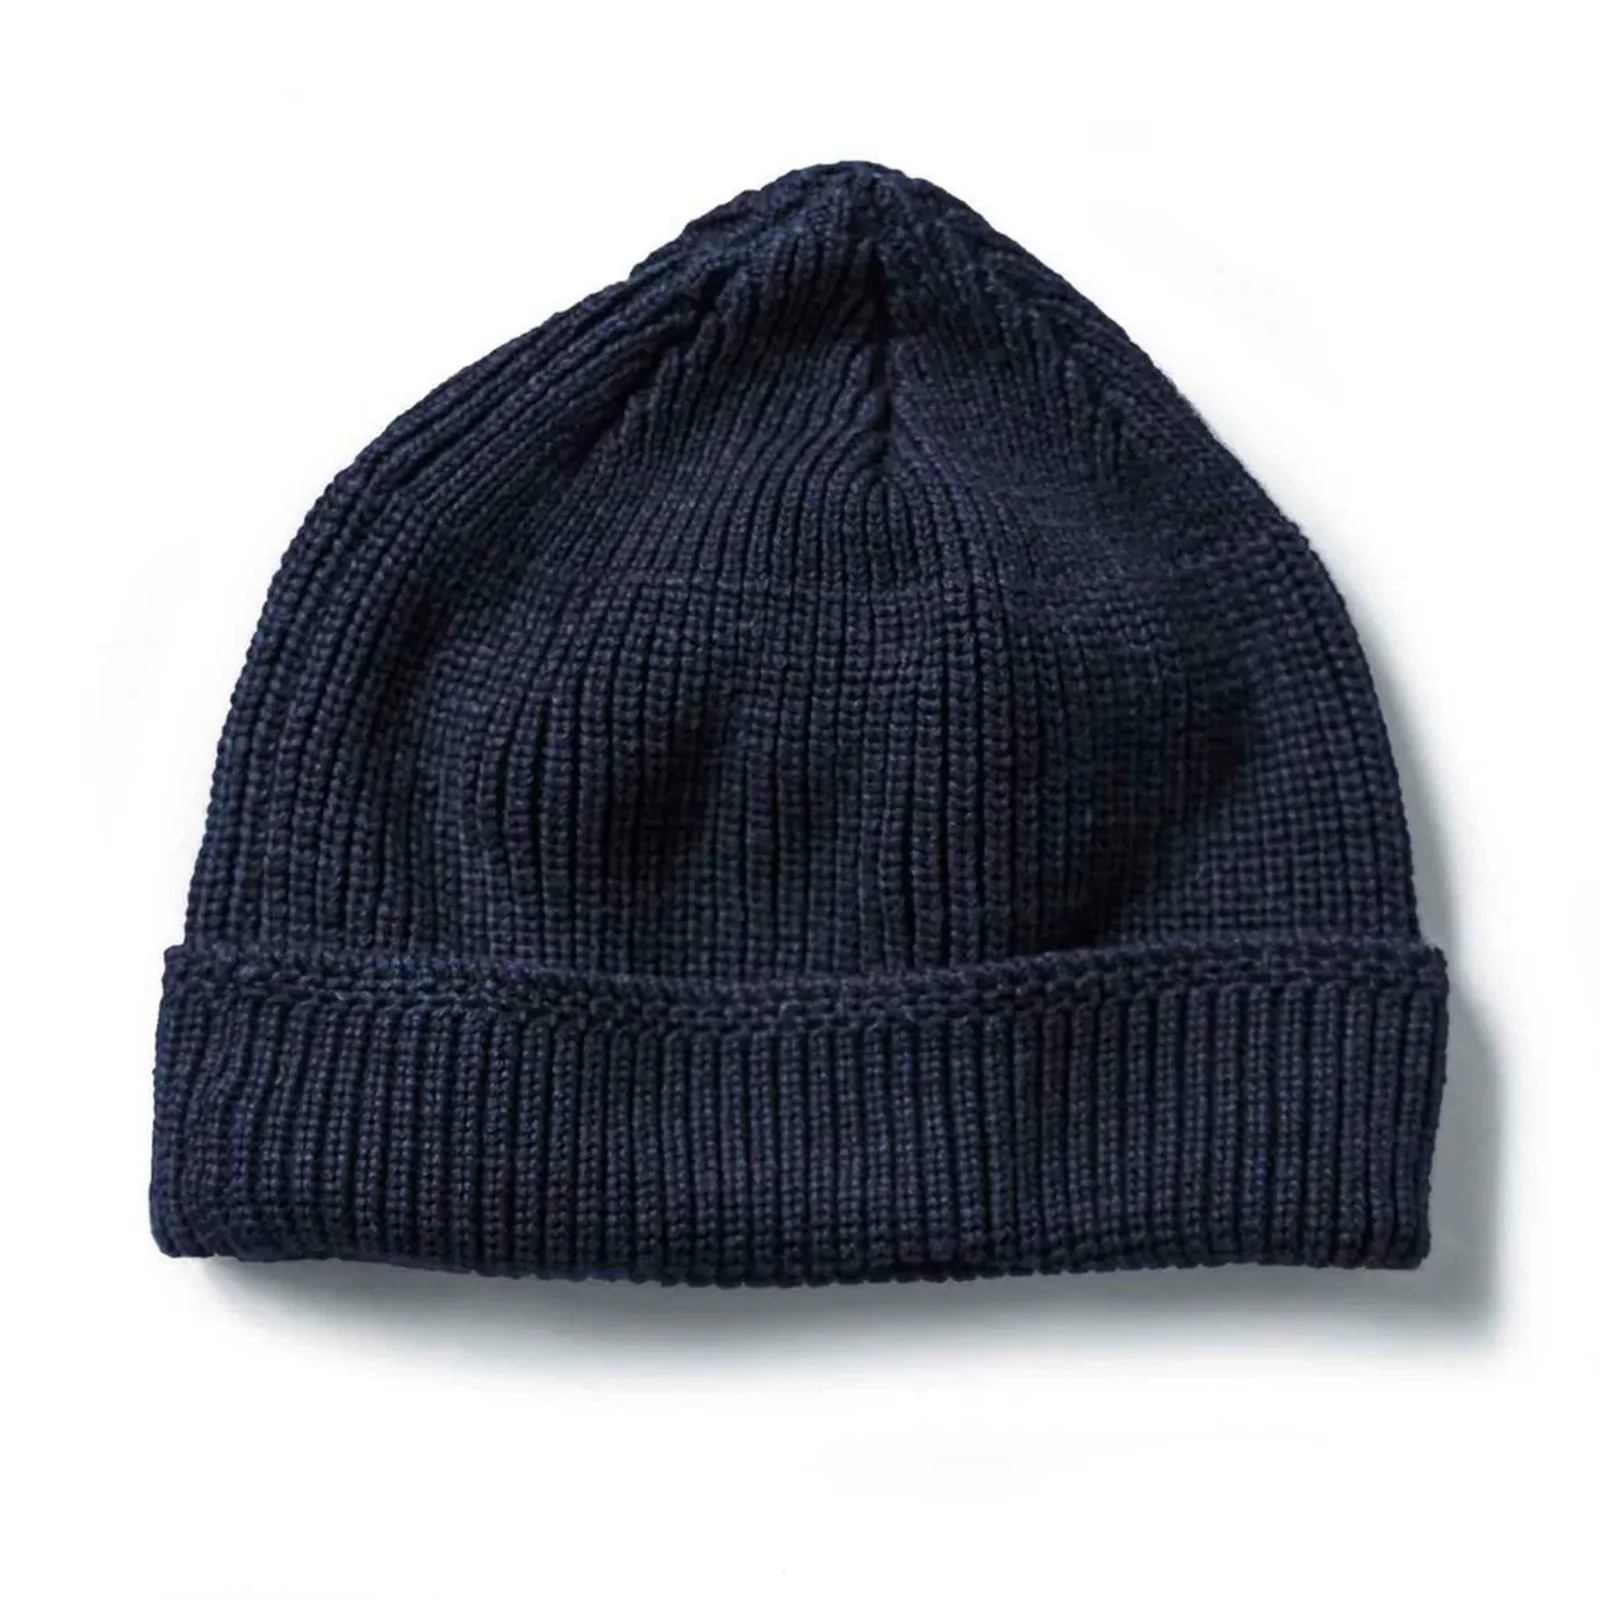 Image of The Rib Beanie in Heather Navy